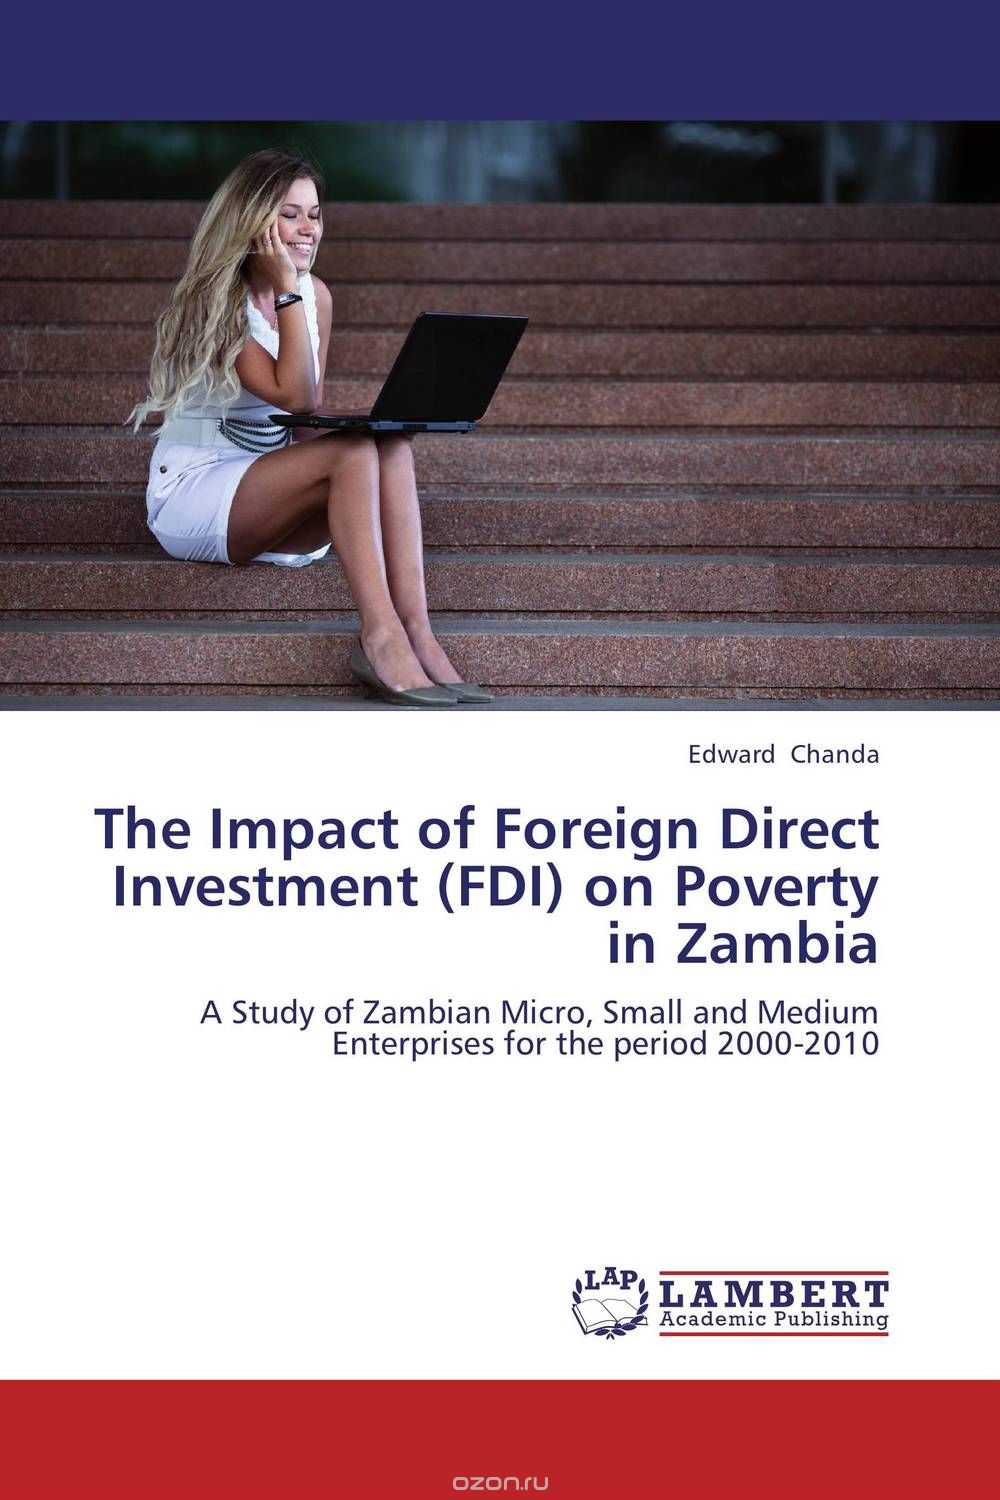 Скачать книгу "The Impact of Foreign Direct Investment (FDI) on Poverty in Zambia"